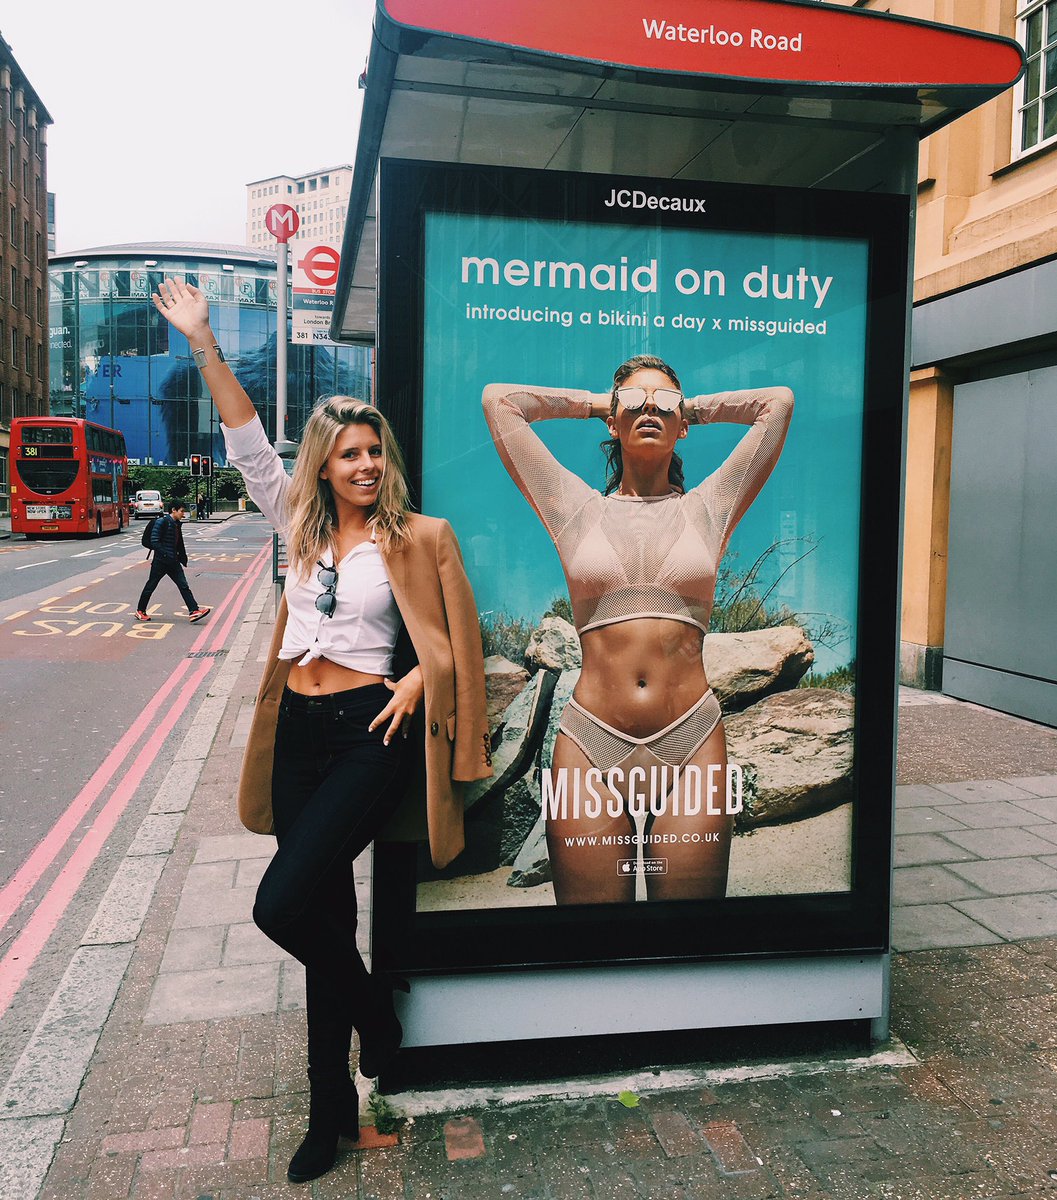 Seeing double ???? So fun seeing our @abikiniaday X @missguided collection billboards all around London ???????? https://t.co/dD3DBr0XGd